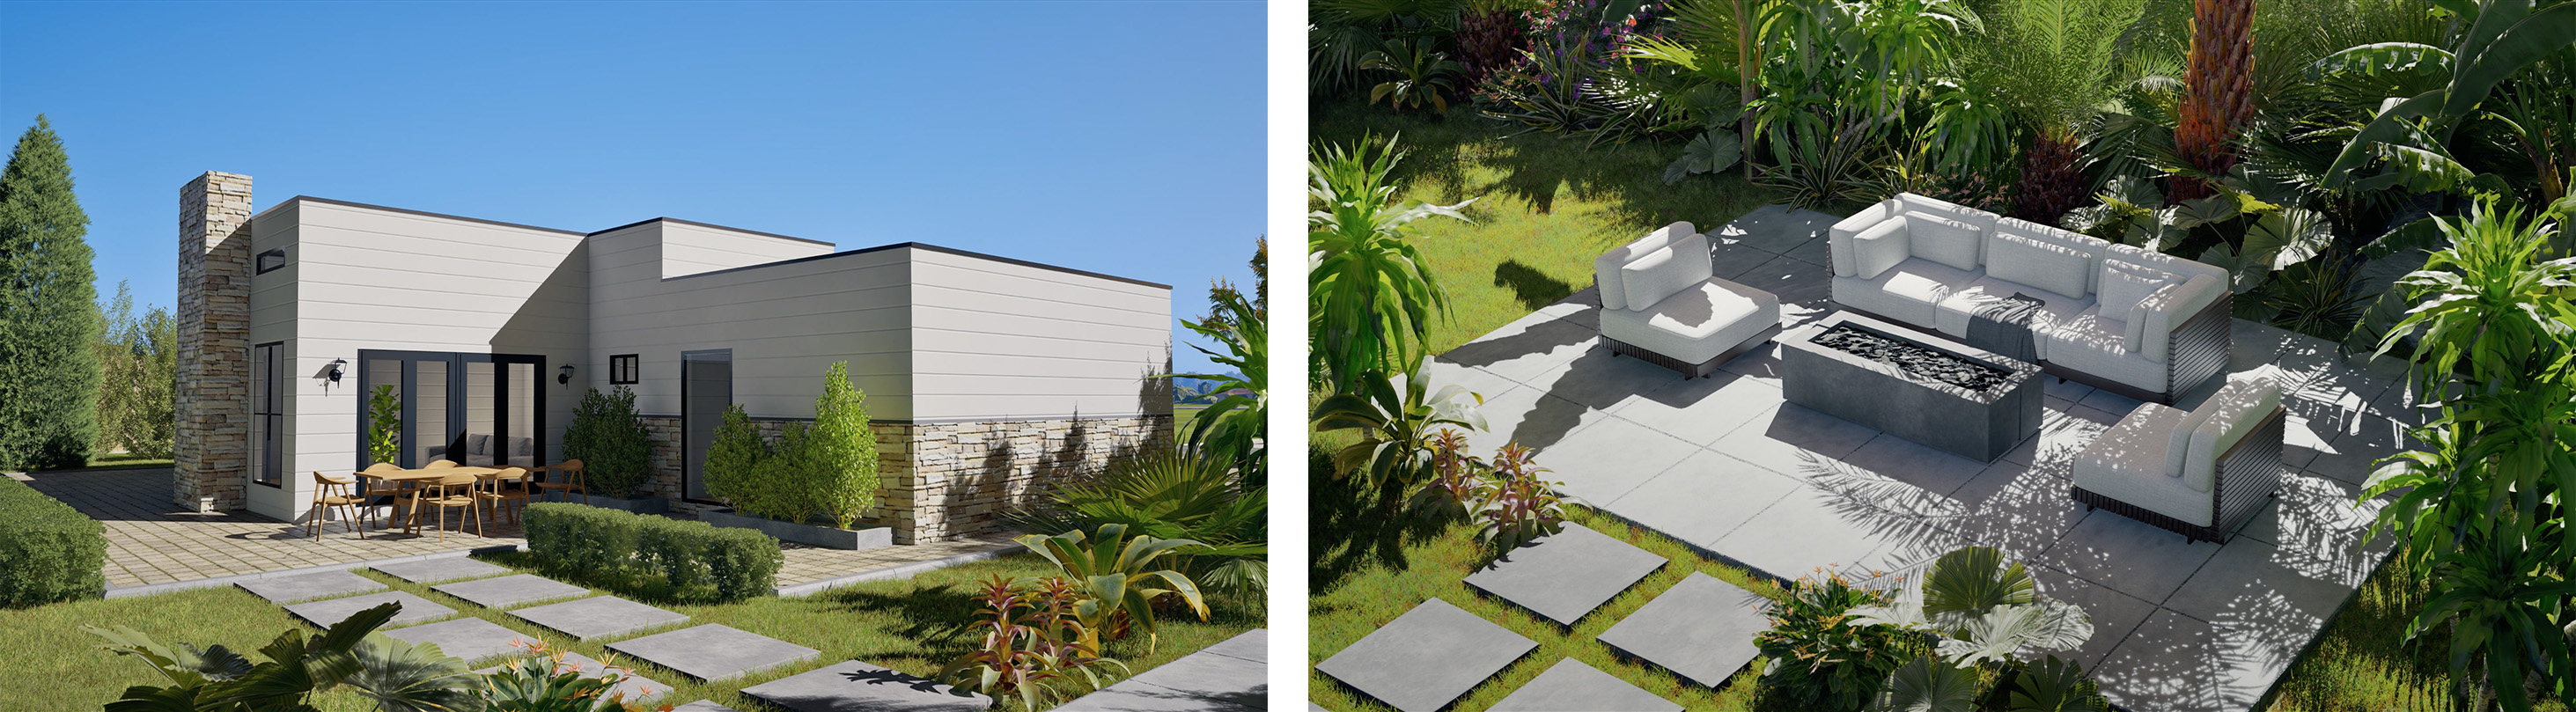 rendering of noncombustible home built with concrete wall panels